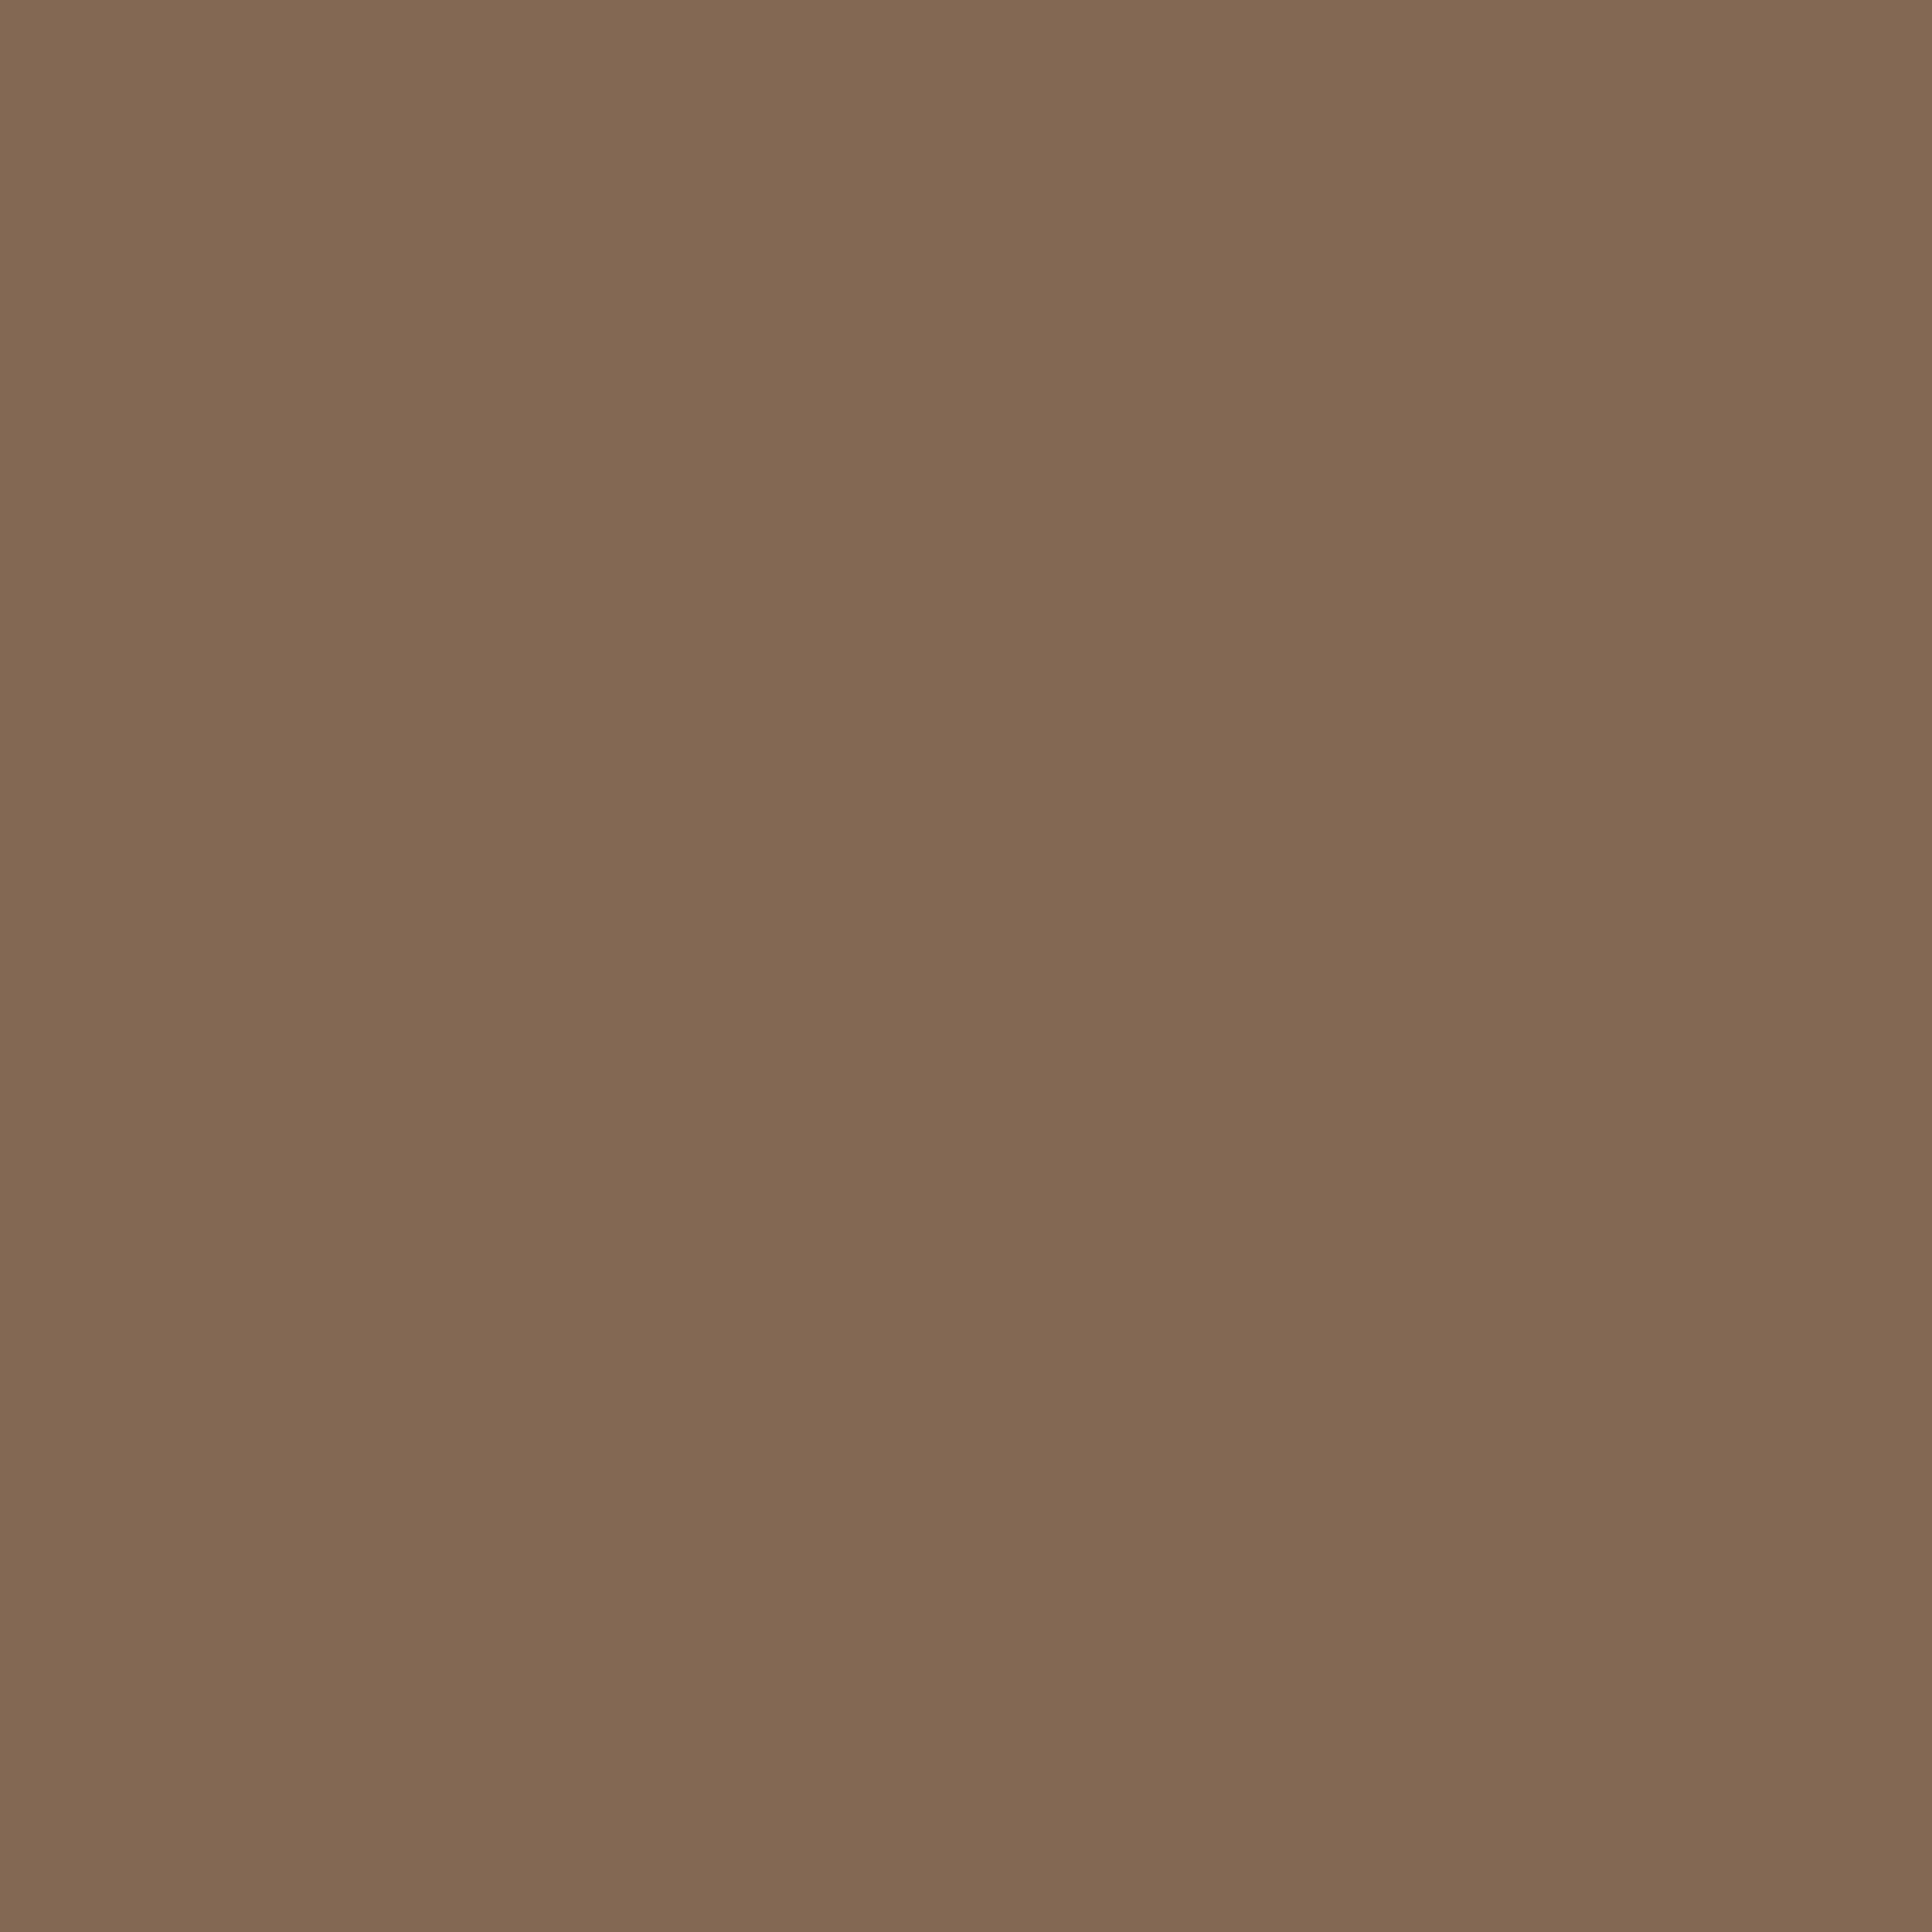 3600x3600 Pastel Brown Solid Color Background